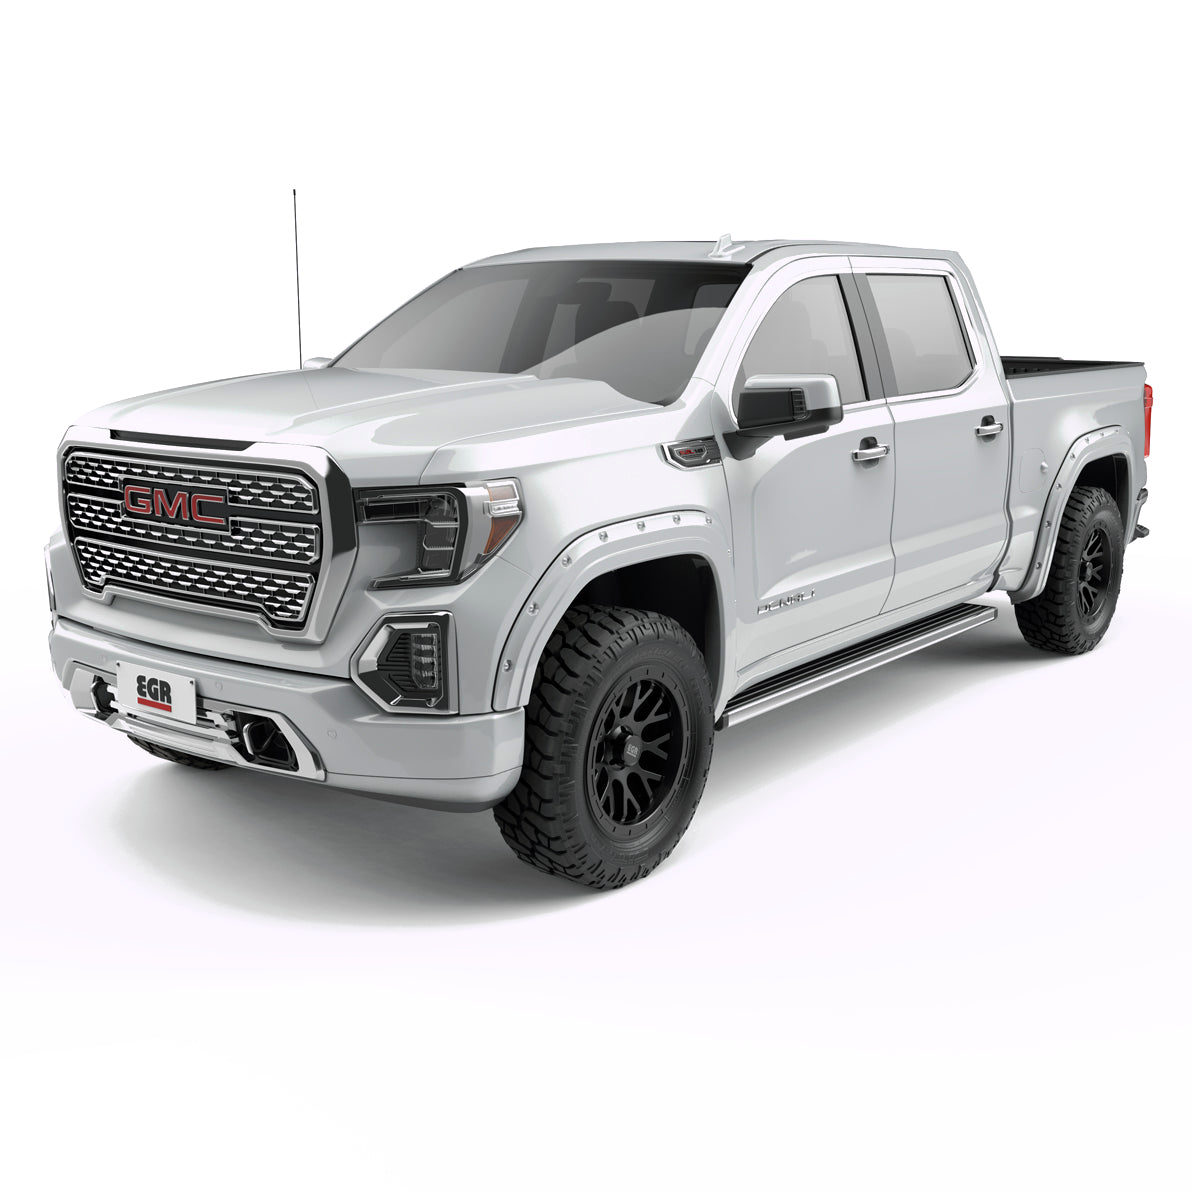 EGR 2019-2024 GMC Sierra 1500 2 & 4 Door Extended Cab Crew Cab Standard Cab Pickup Traditional Bolt-on look Fender Flares set of 4 Painted to Code Summit White 791794-GAZ